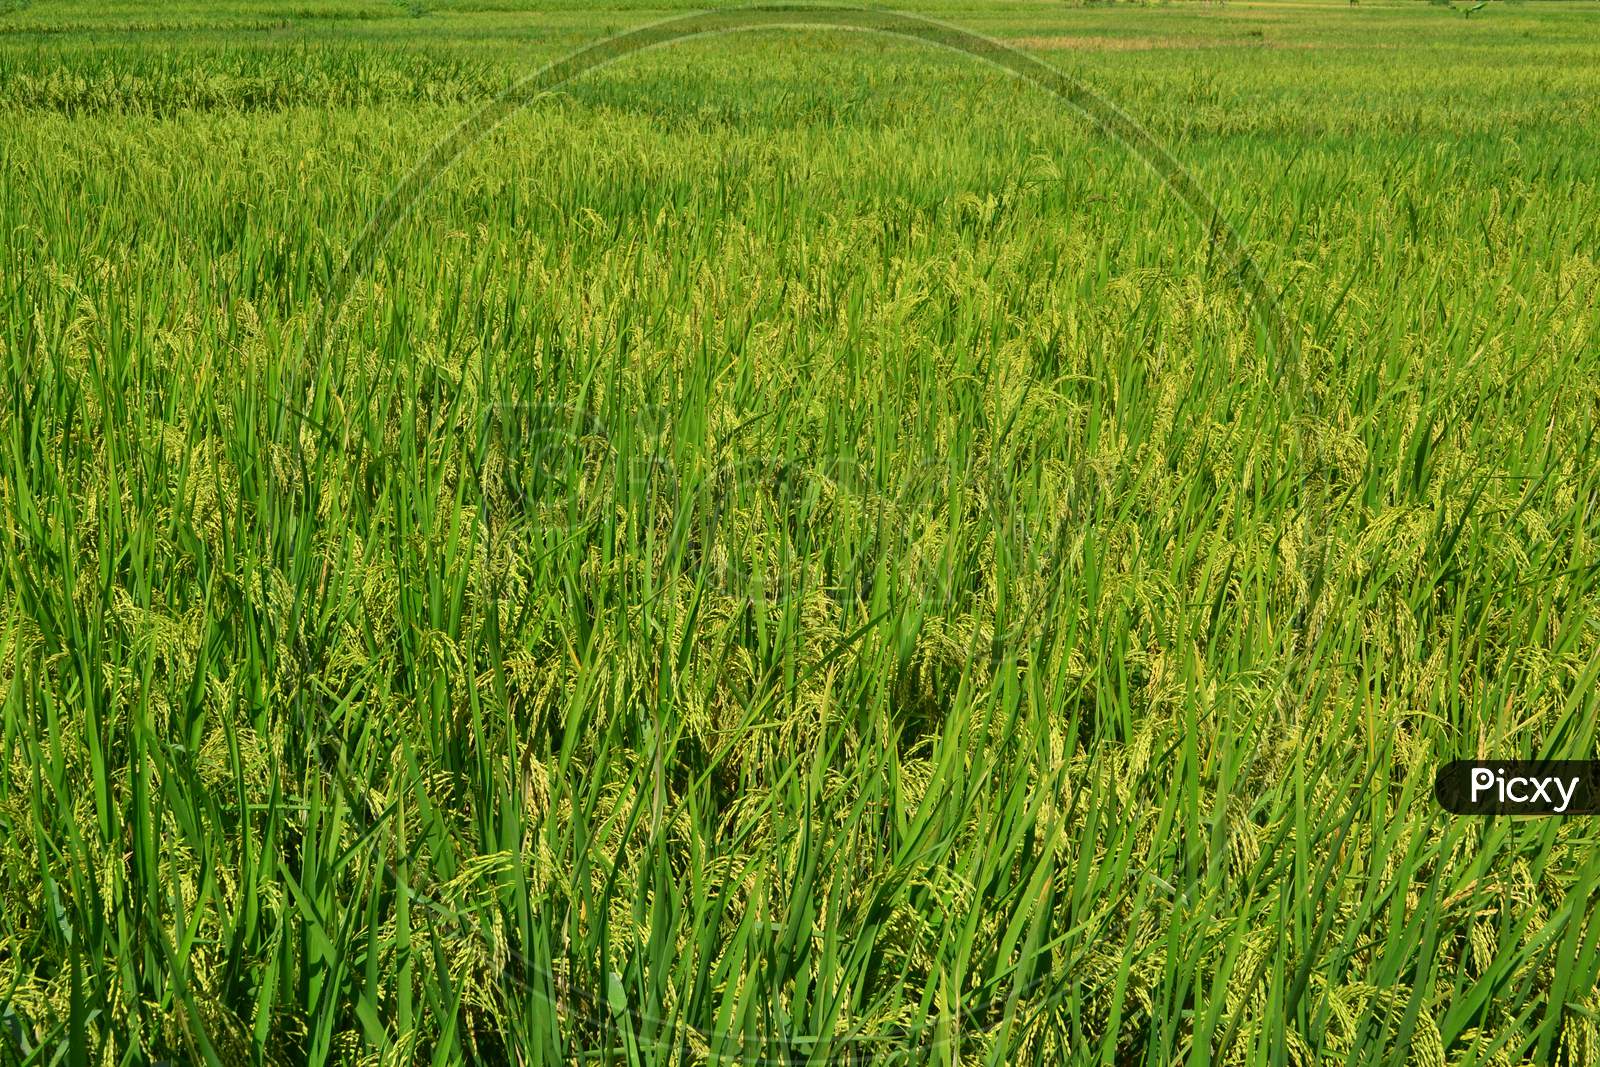 Yellow Paddy Grains With Green Paddy Plant Leaves